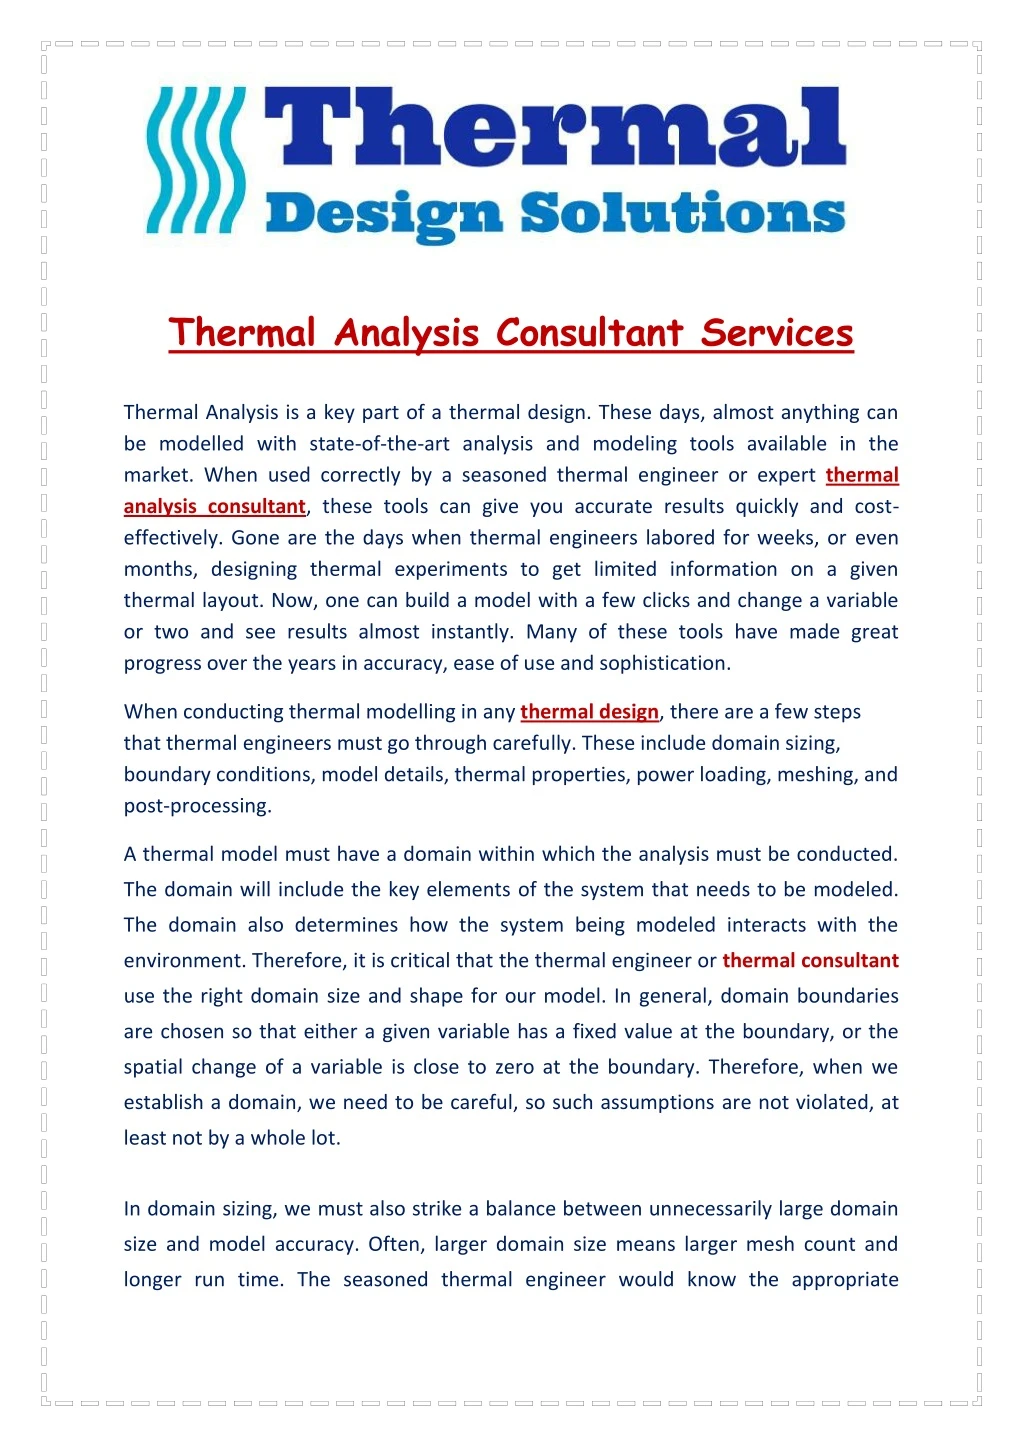 thermal analysis consultant services